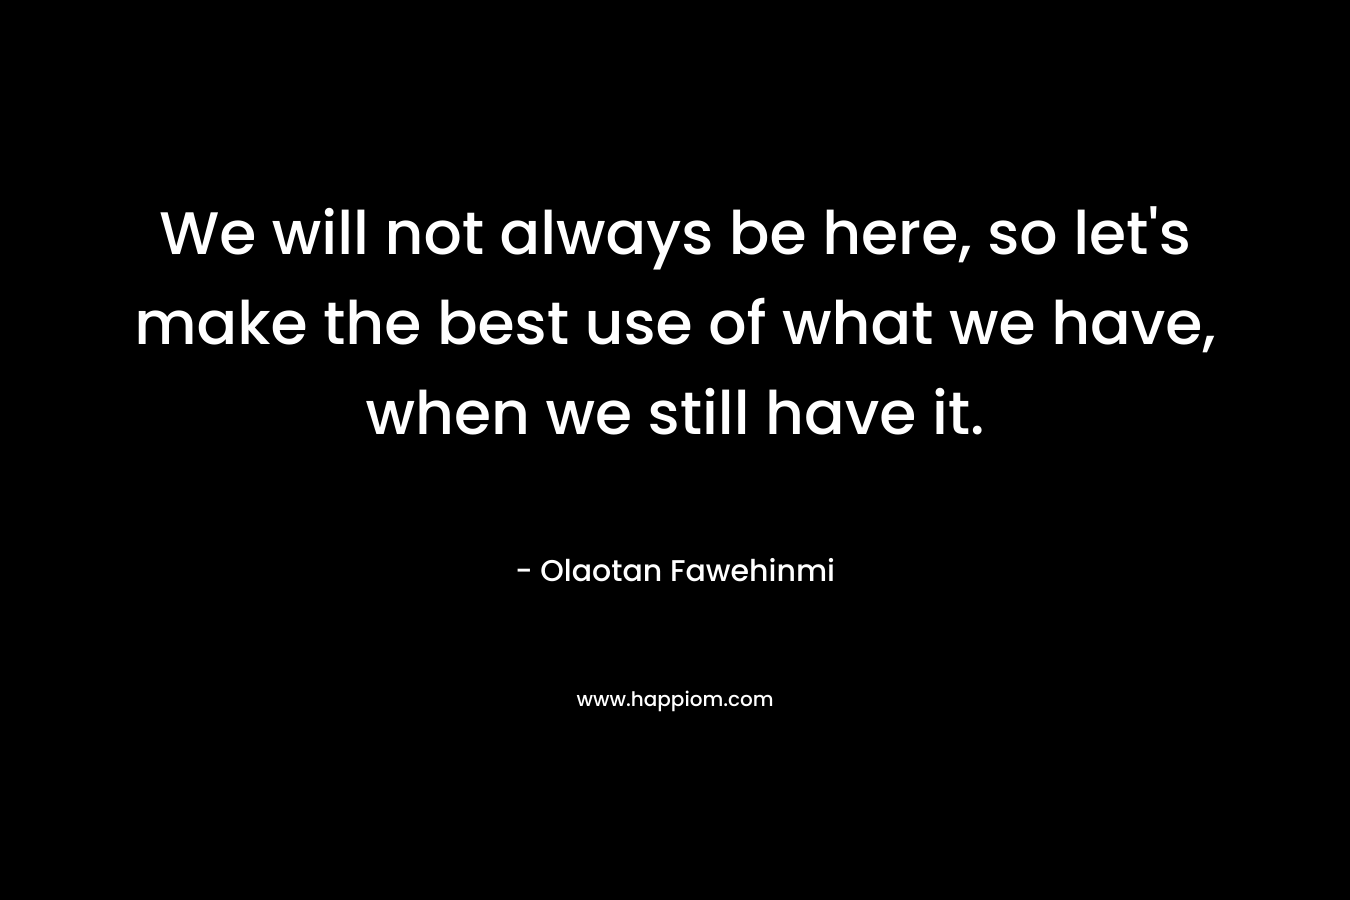 We will not always be here, so let's make the best use of what we have, when we still have it.